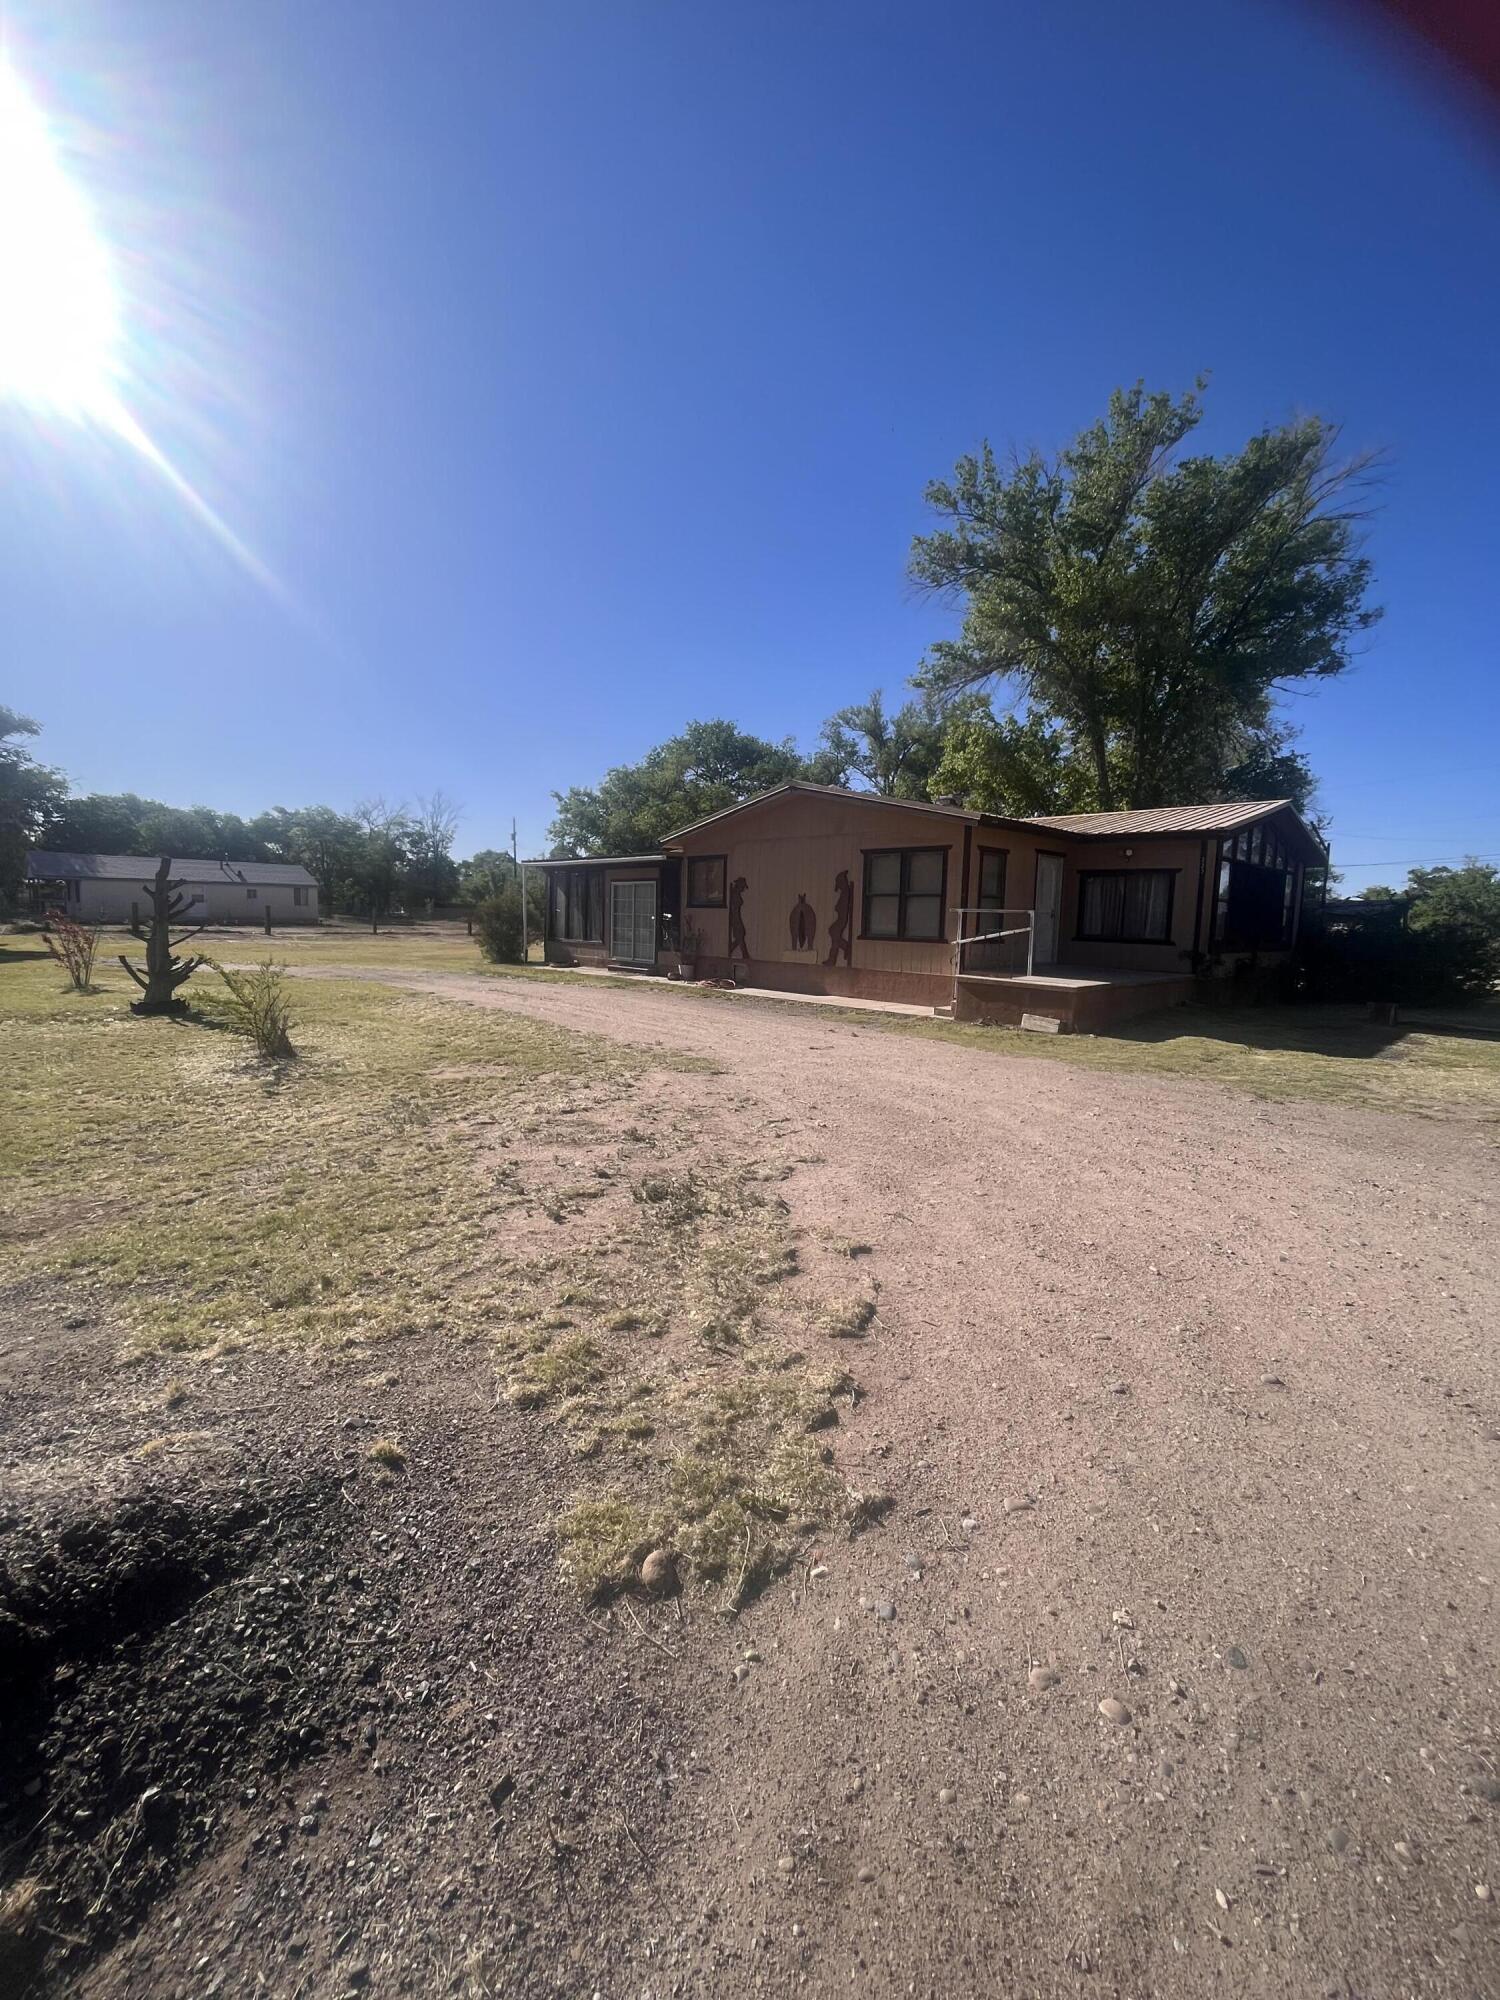 Beautiful well maintained triple wide located in the heart of Los Lunas NM, City Living with a feel of country living. schedule your showing today don't miss your opportunity to own this amazing home and piece of land that is still conveniently located 25 minutes to albuquerque easy daily commute.